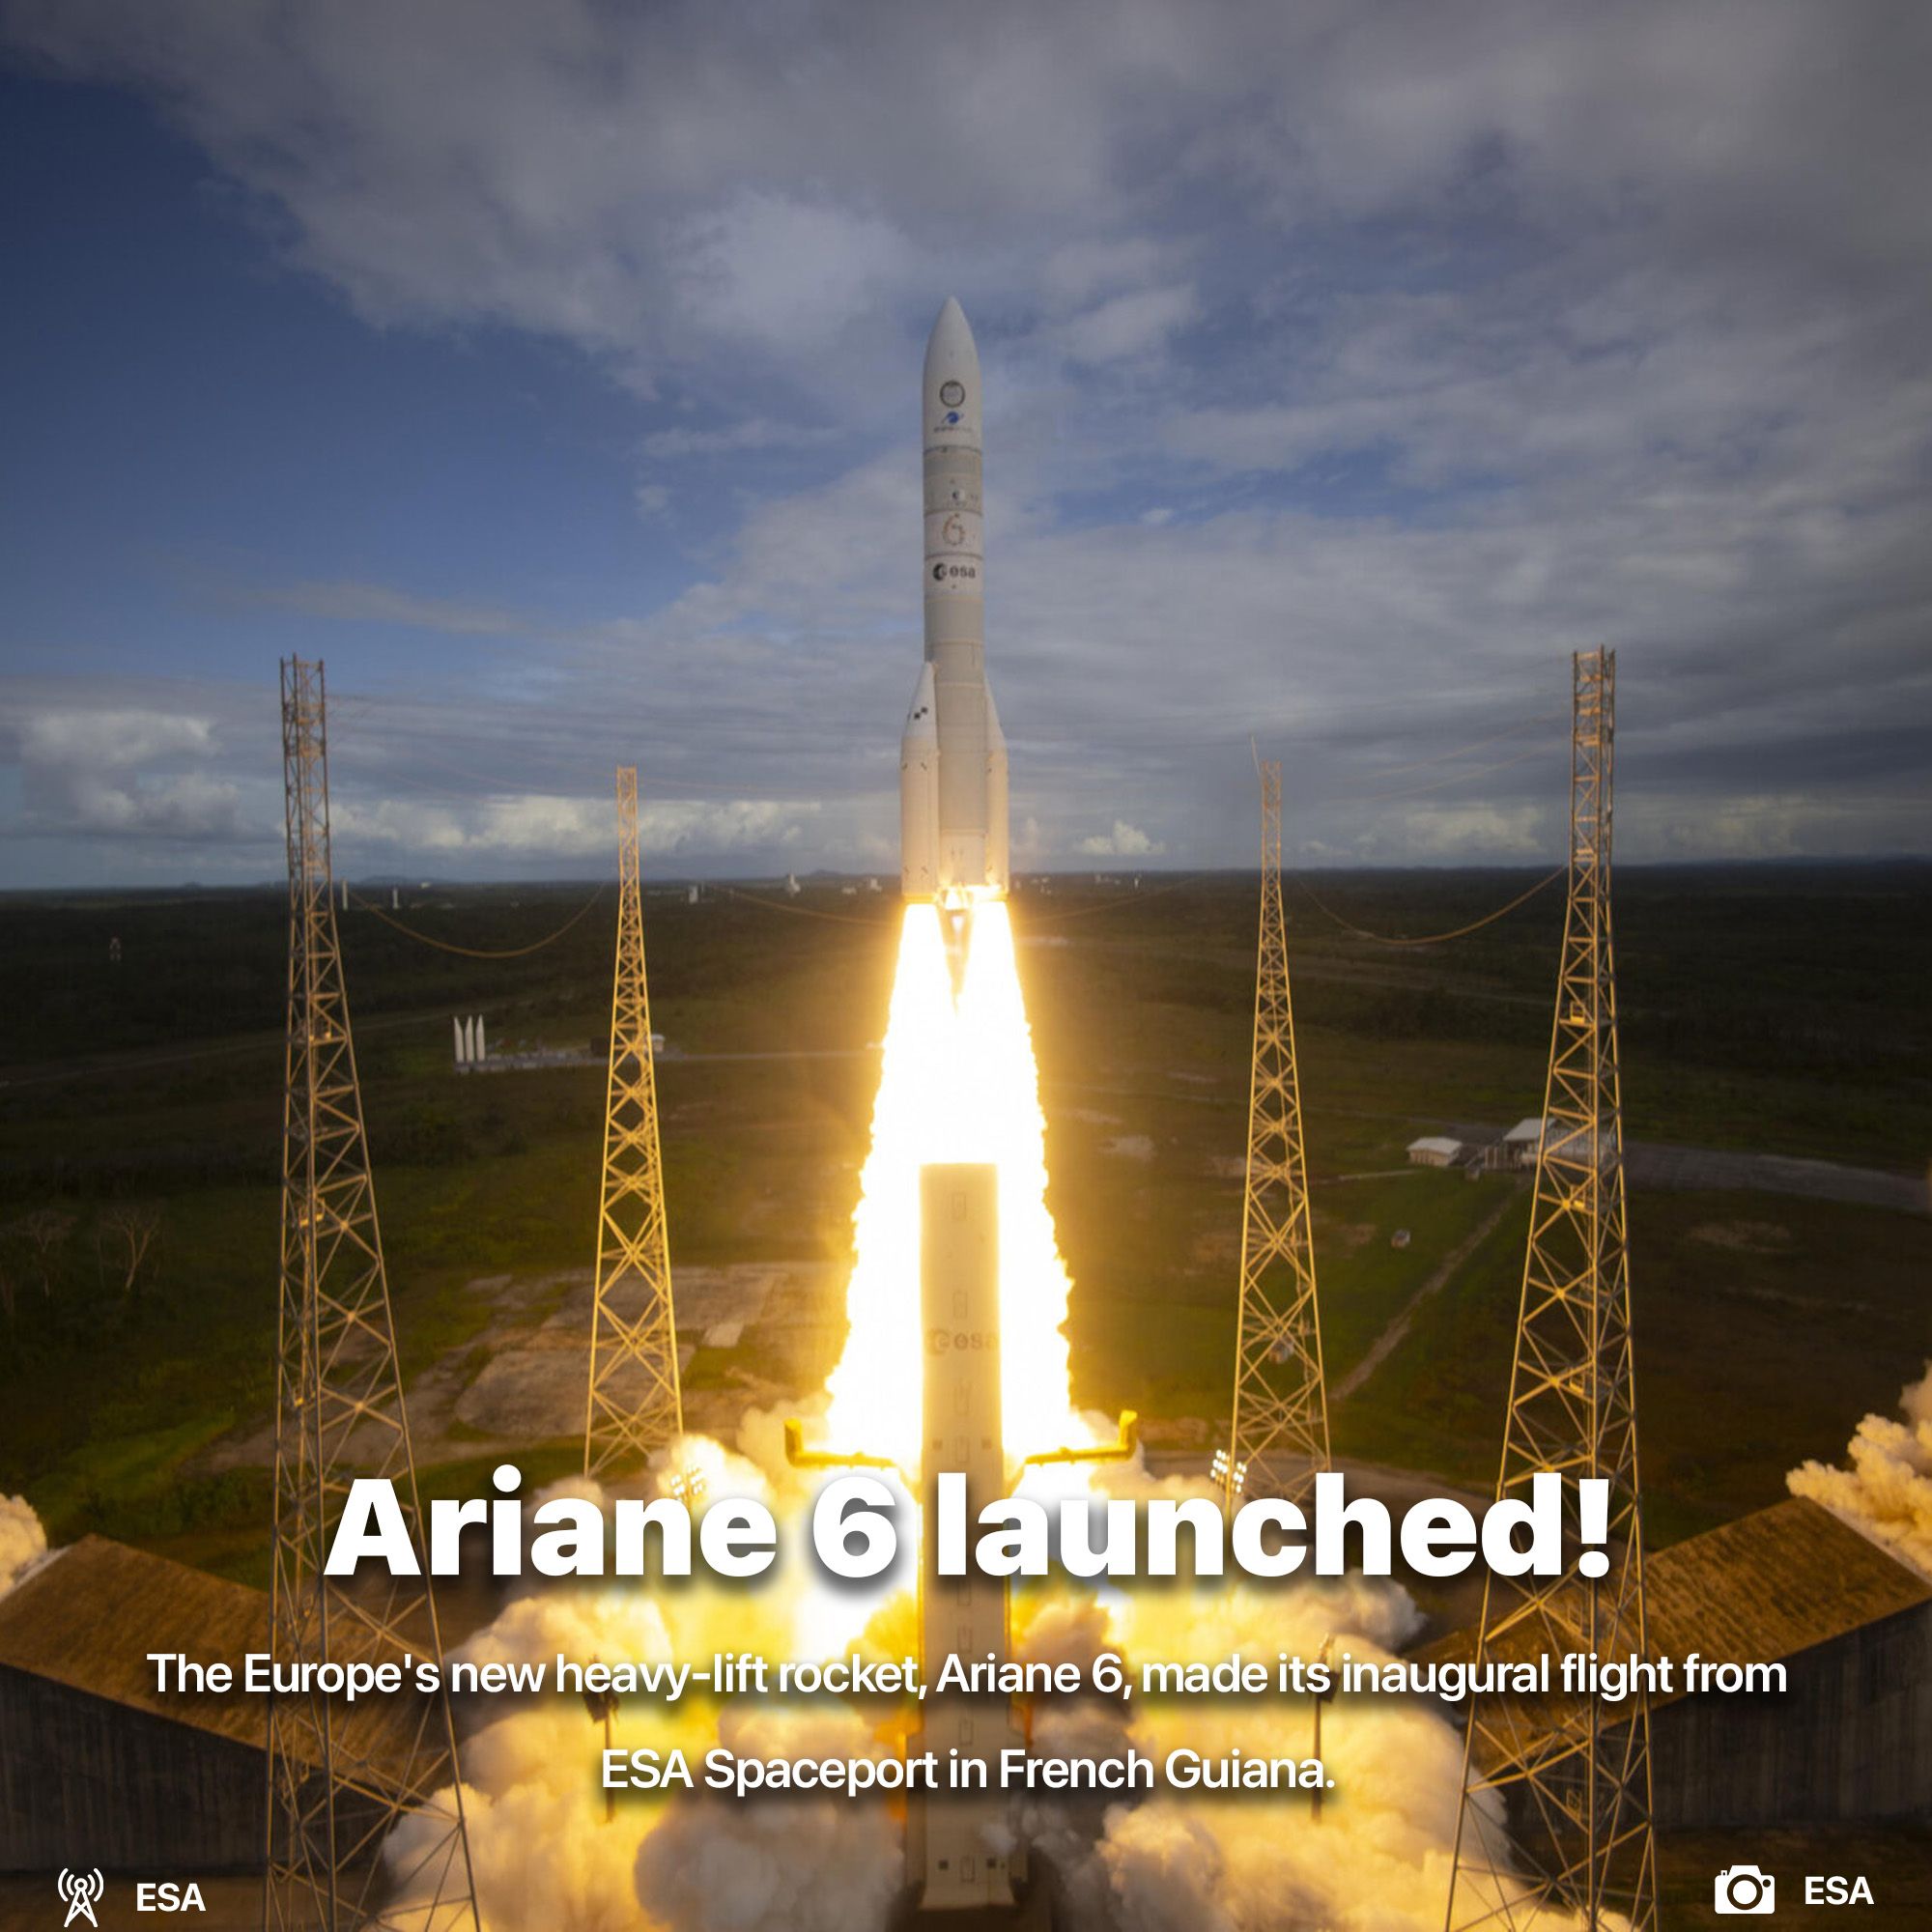 Ariane 6 launched